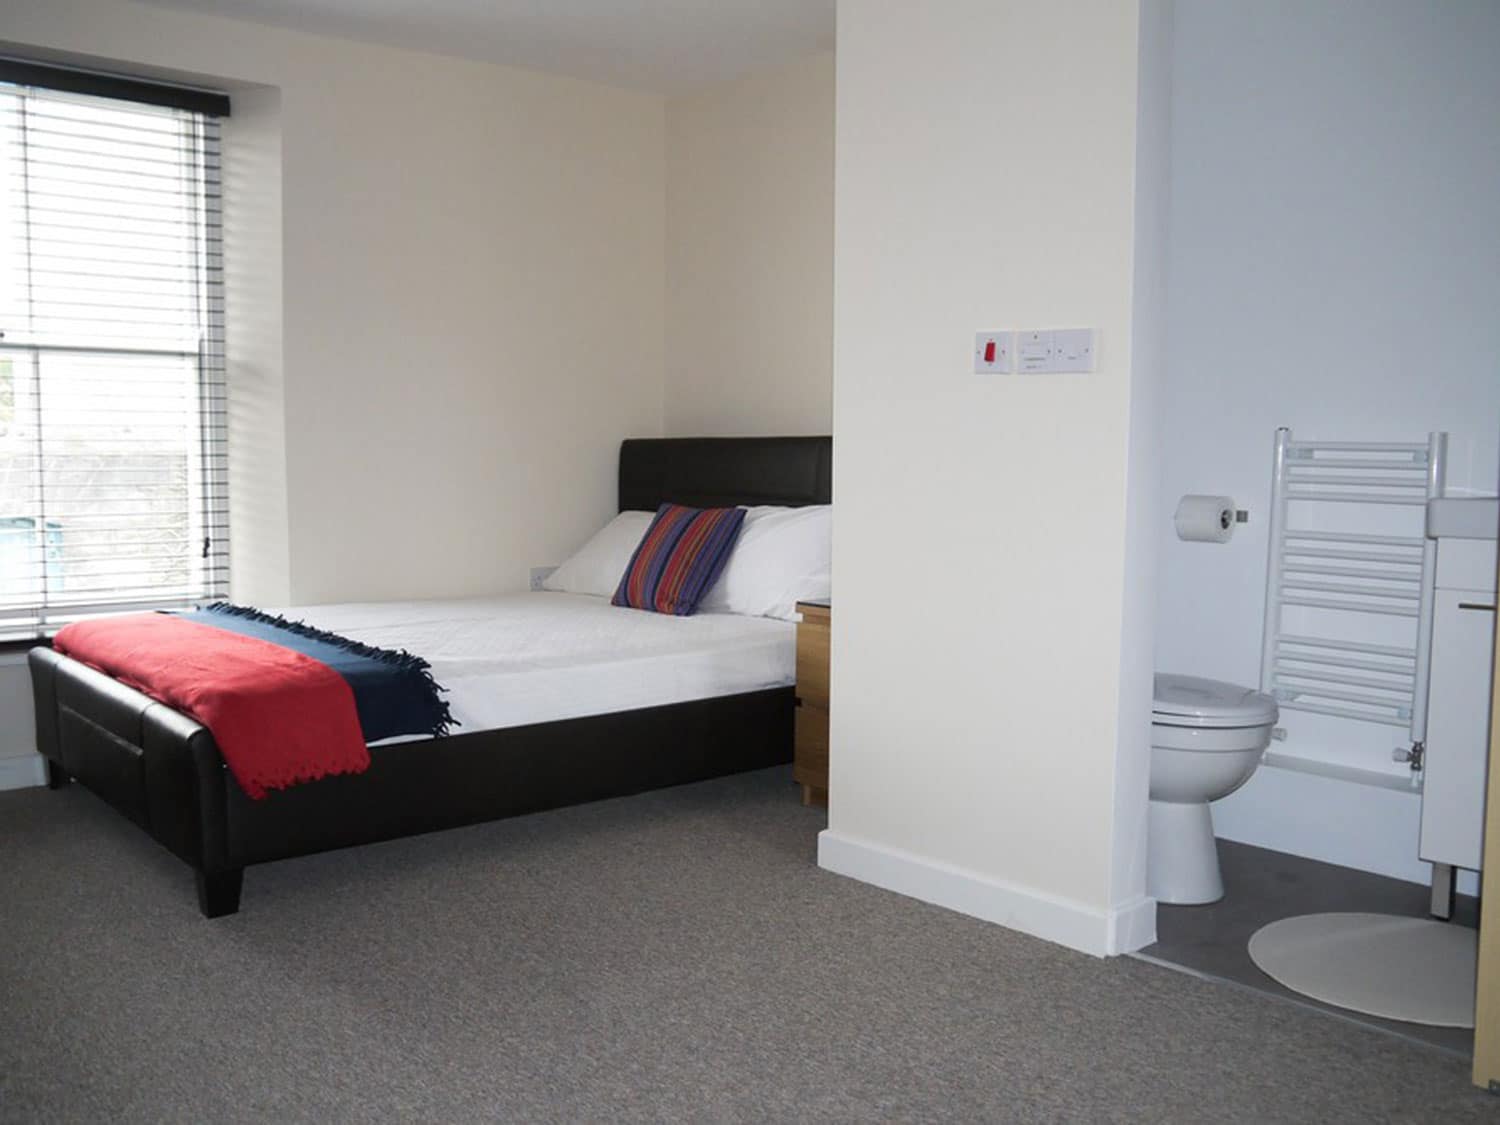 Student flat at The No Place, 6 bedroom flat to rent in Plymouth